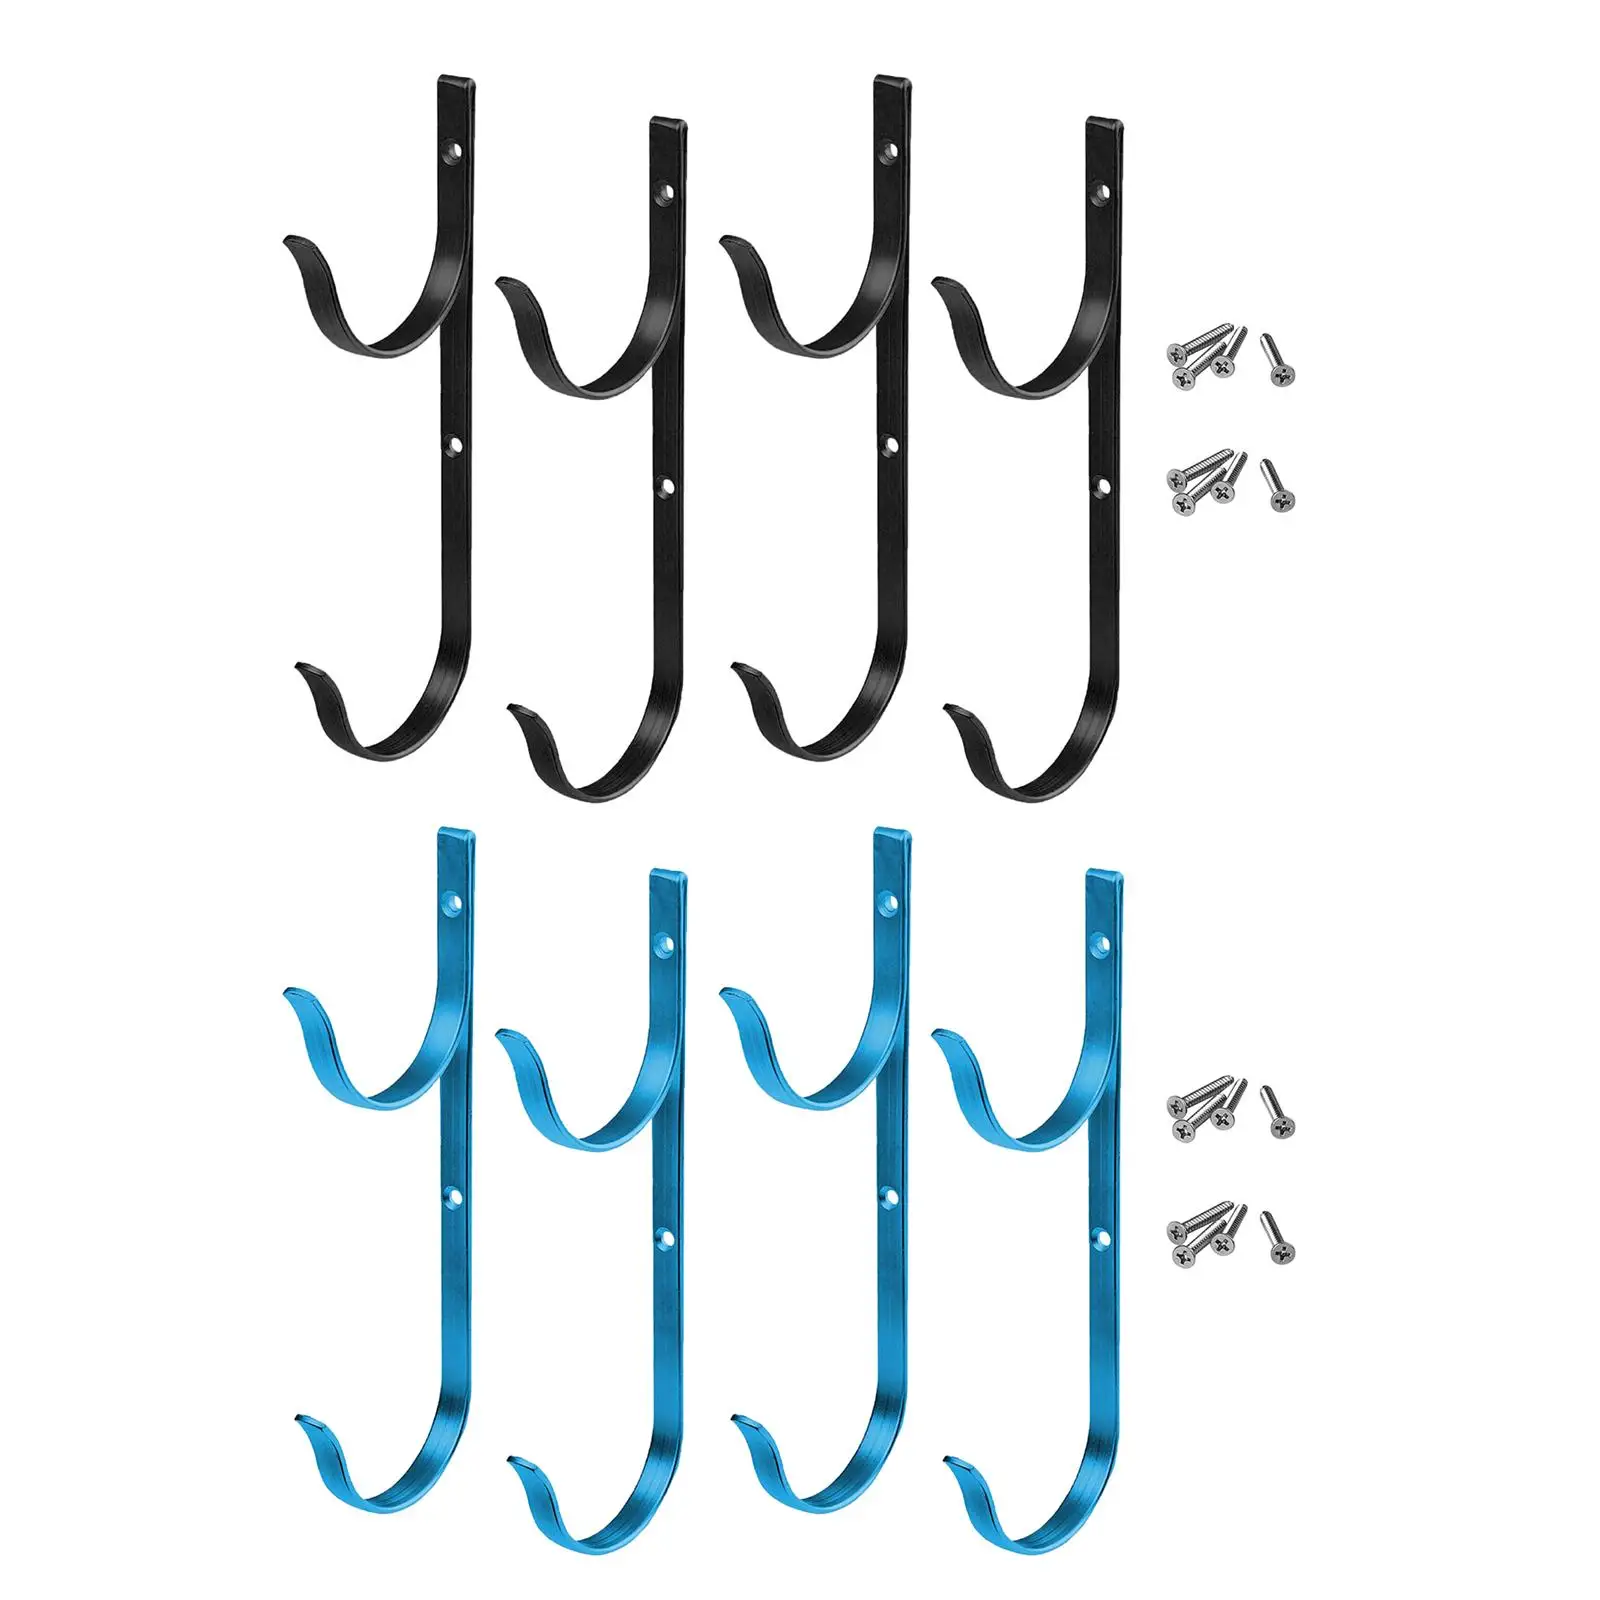 4 Pieces Multifunctional Pool Pole Hangers with Screws Pool Equipment Hooks for Leaf Skimmers Brushes Vacuum Hoses Garden Tools